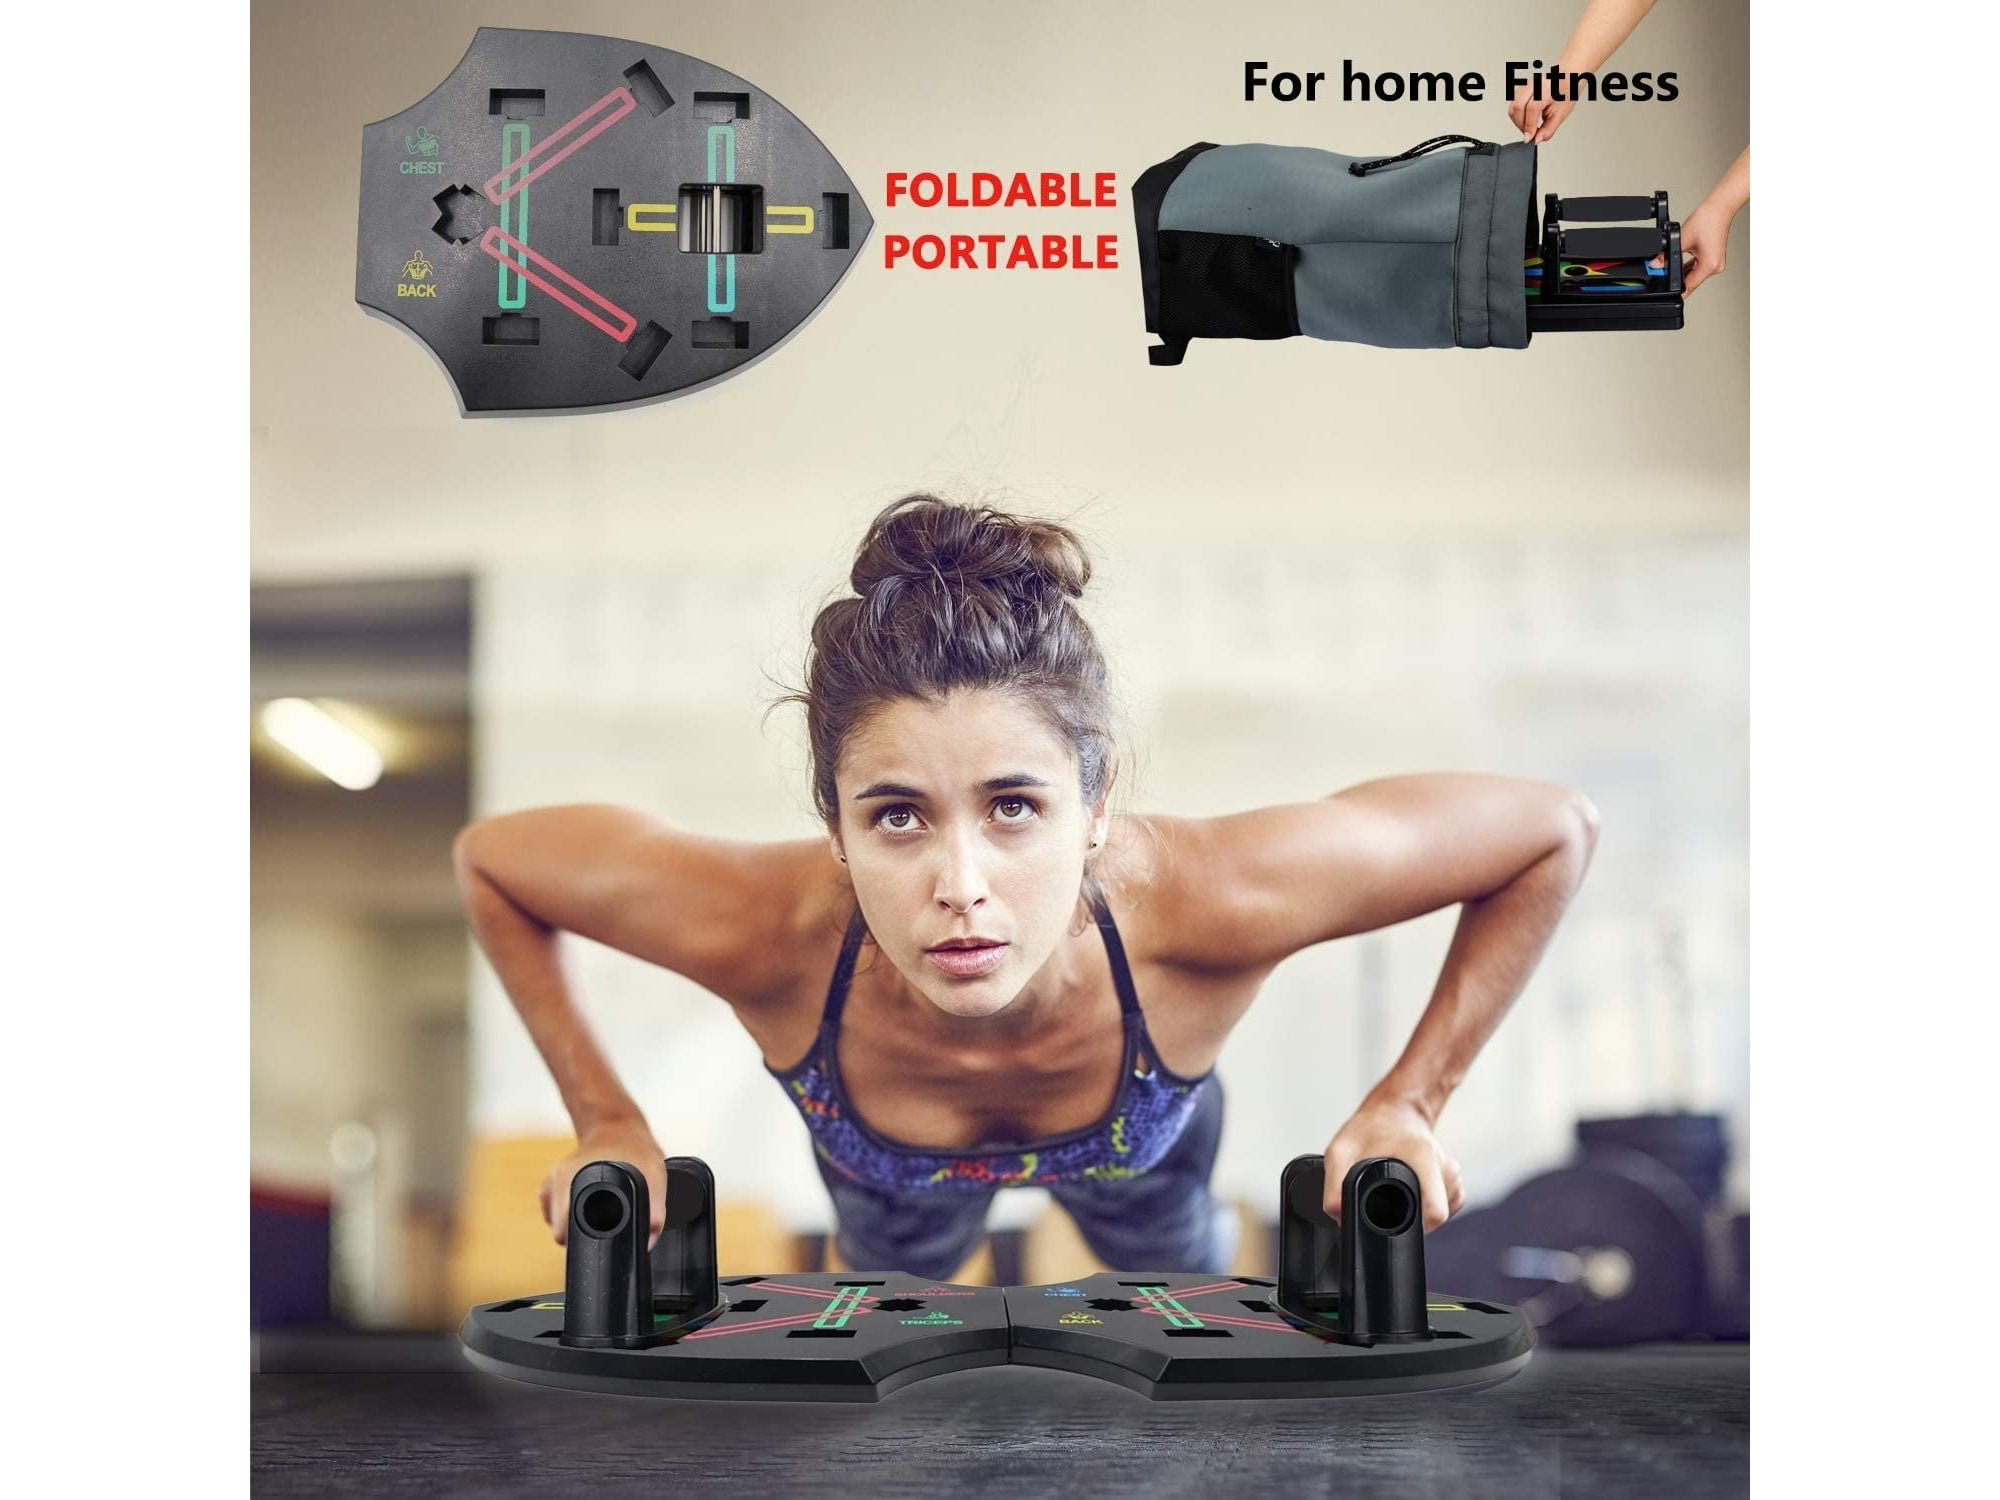 Eoneka Push Up Board 12 In 1 Fitness Pushup Stand Home Workout